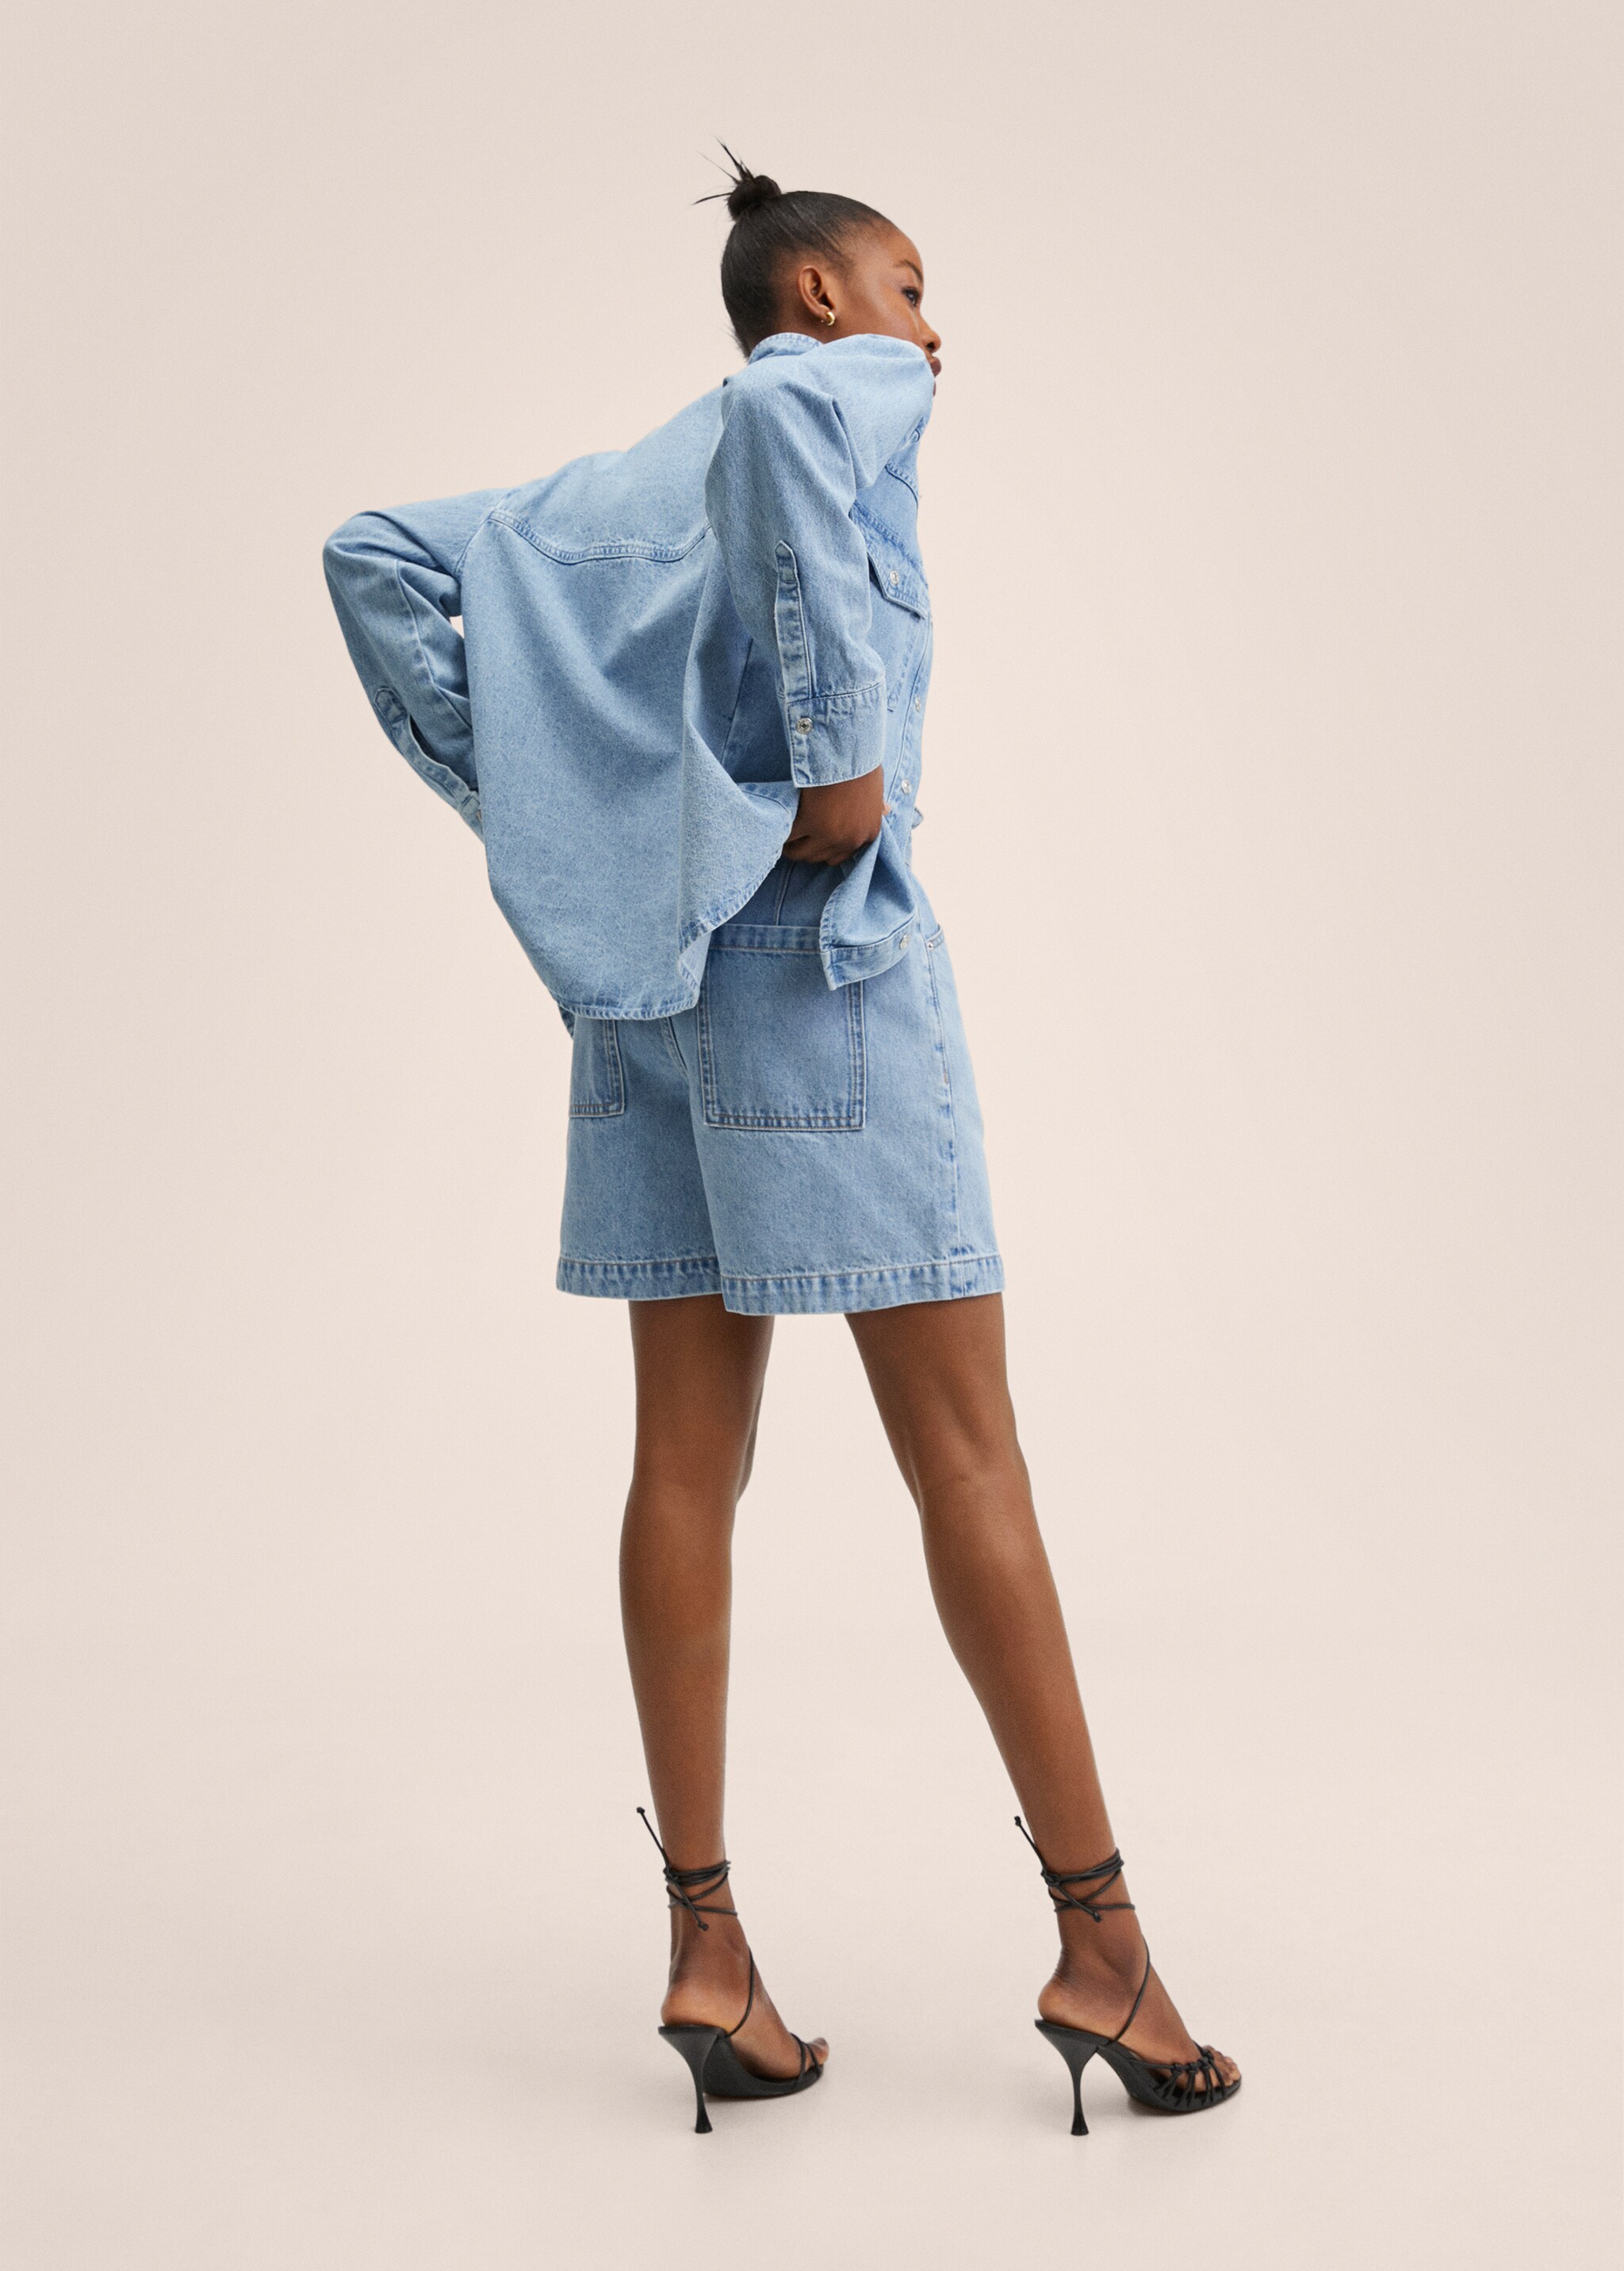 Denim shirt with shoulder pads - Reverse of the article